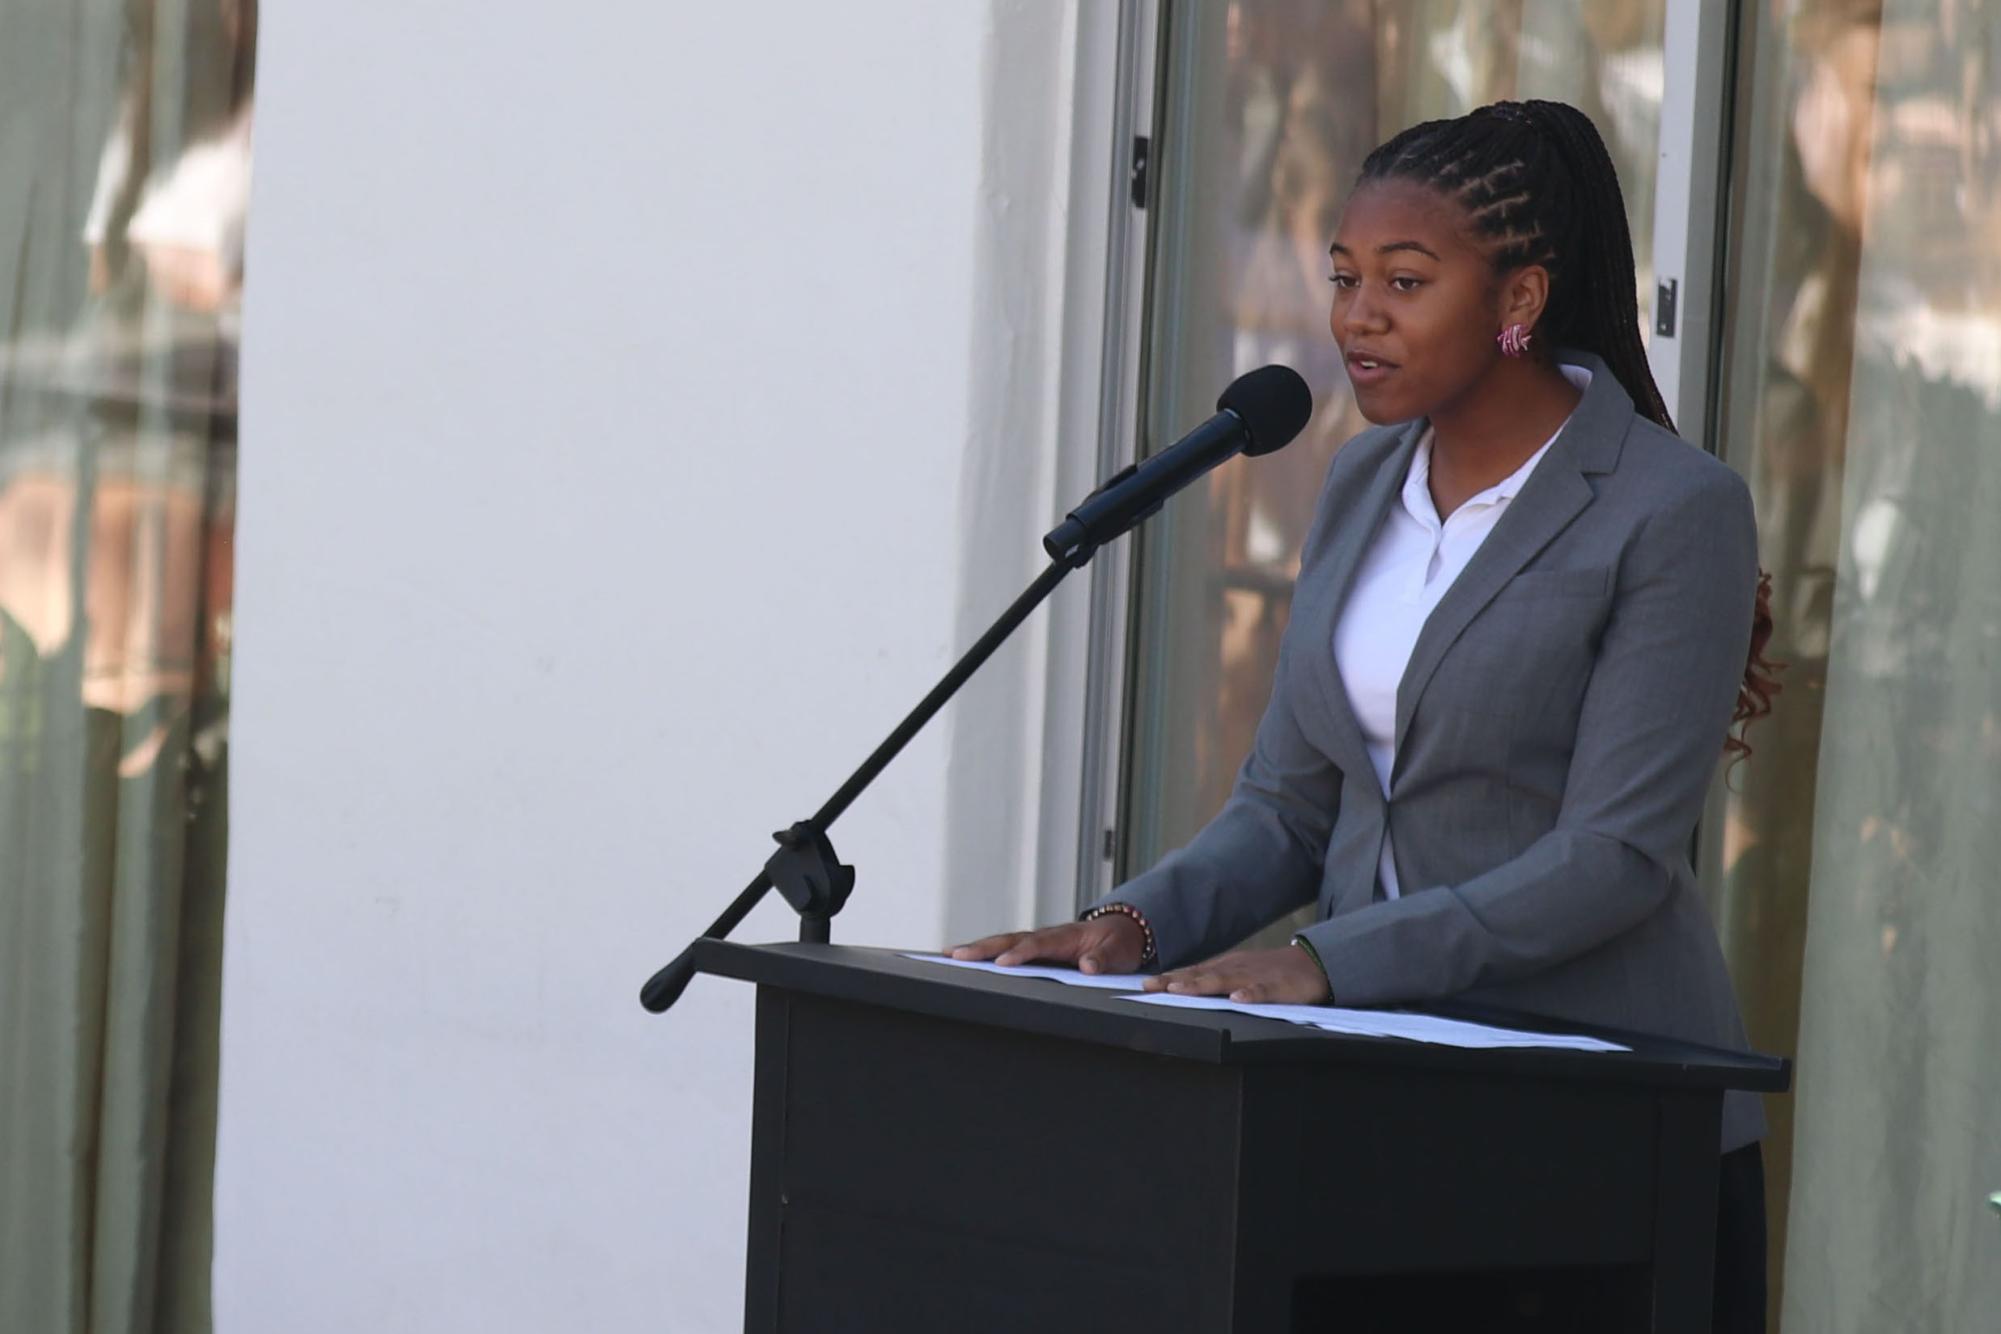 Student Body President Anaiya Asomugha (24) speaks to students and faculty, welcoming everyone to the 2023-24 school year Aug. 22. Asomugha and Head of School Elizabeth English gave speeches in the courtyard in celebration of the first day of school.